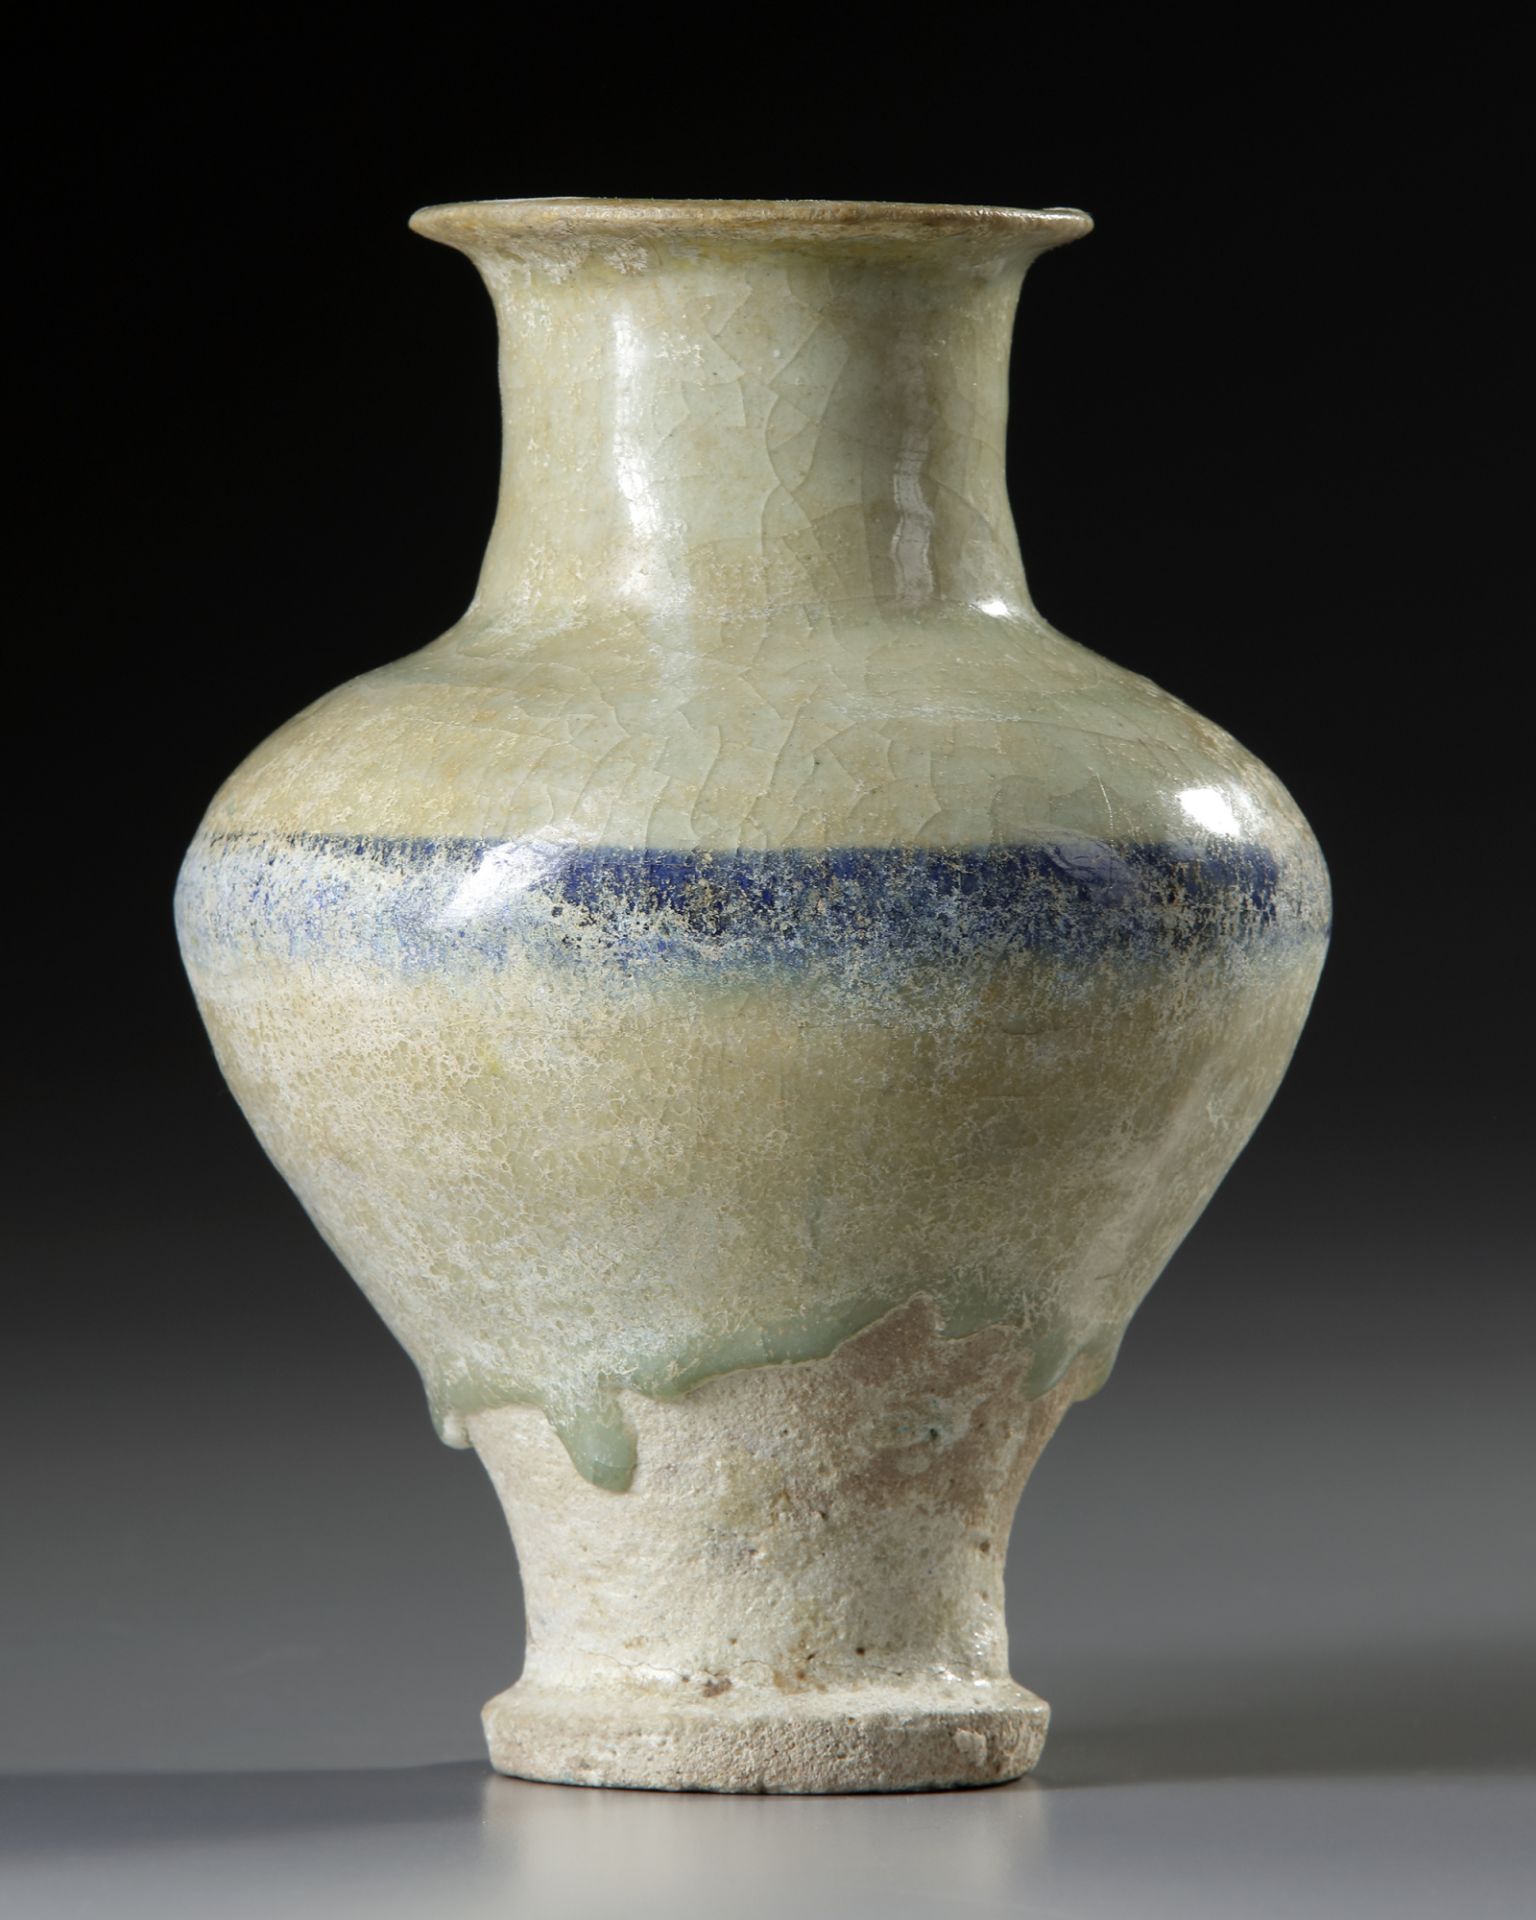 A RAQQA BLUE AND WHITE POTTERY JAR, SYRIA, 13TH CENTURY - Image 2 of 7